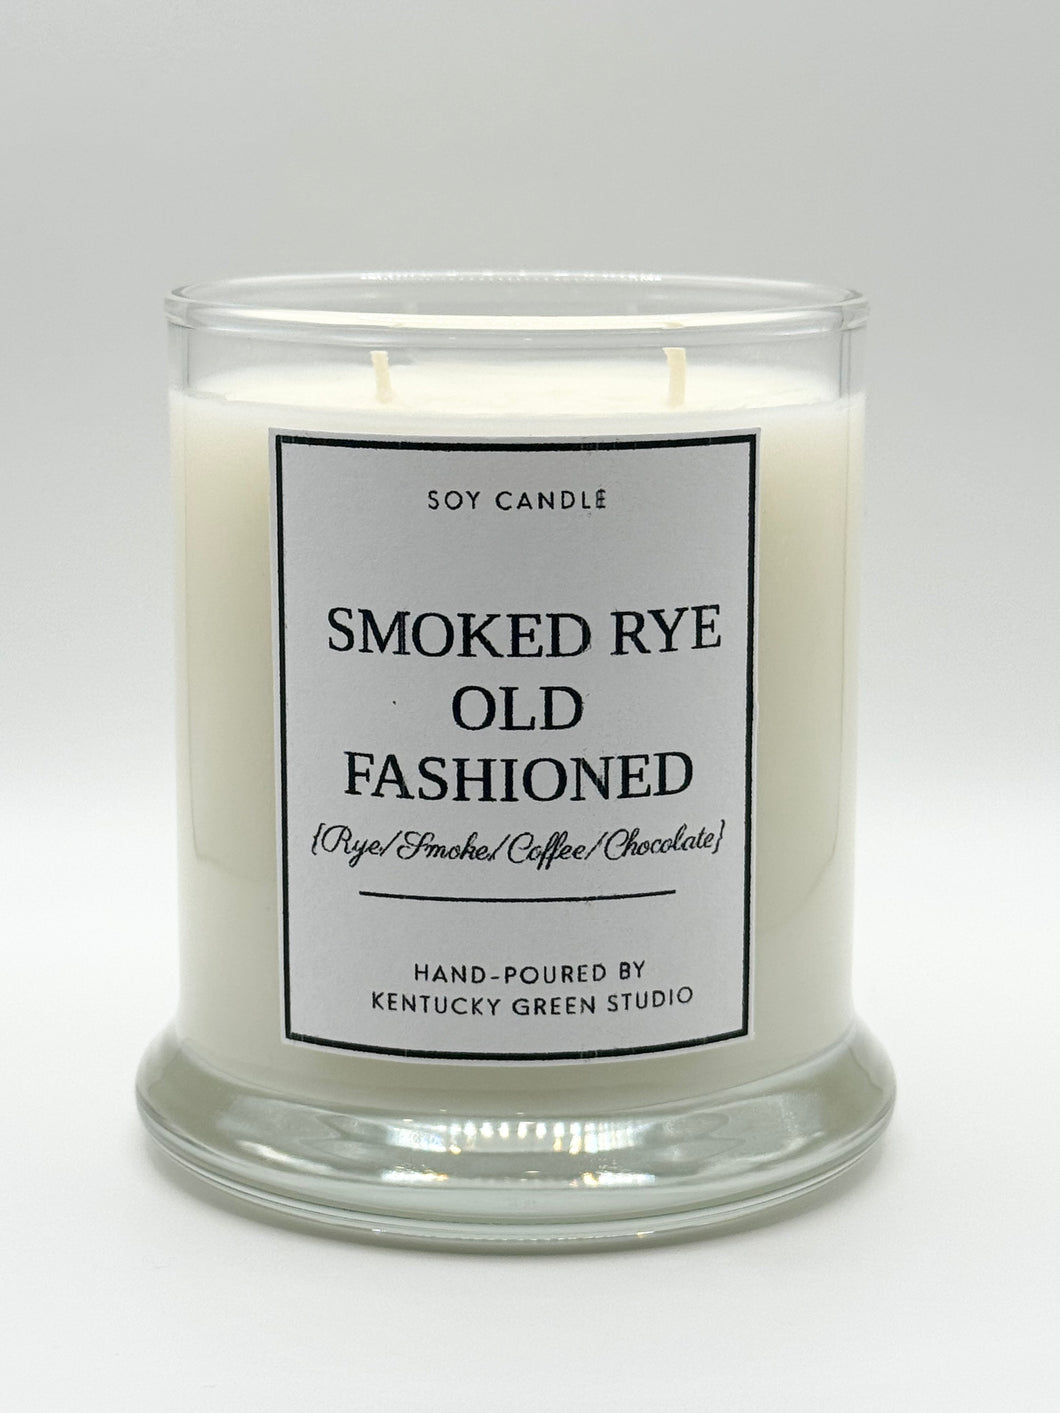 Smoked Rye Old Fashioned Soy Candle